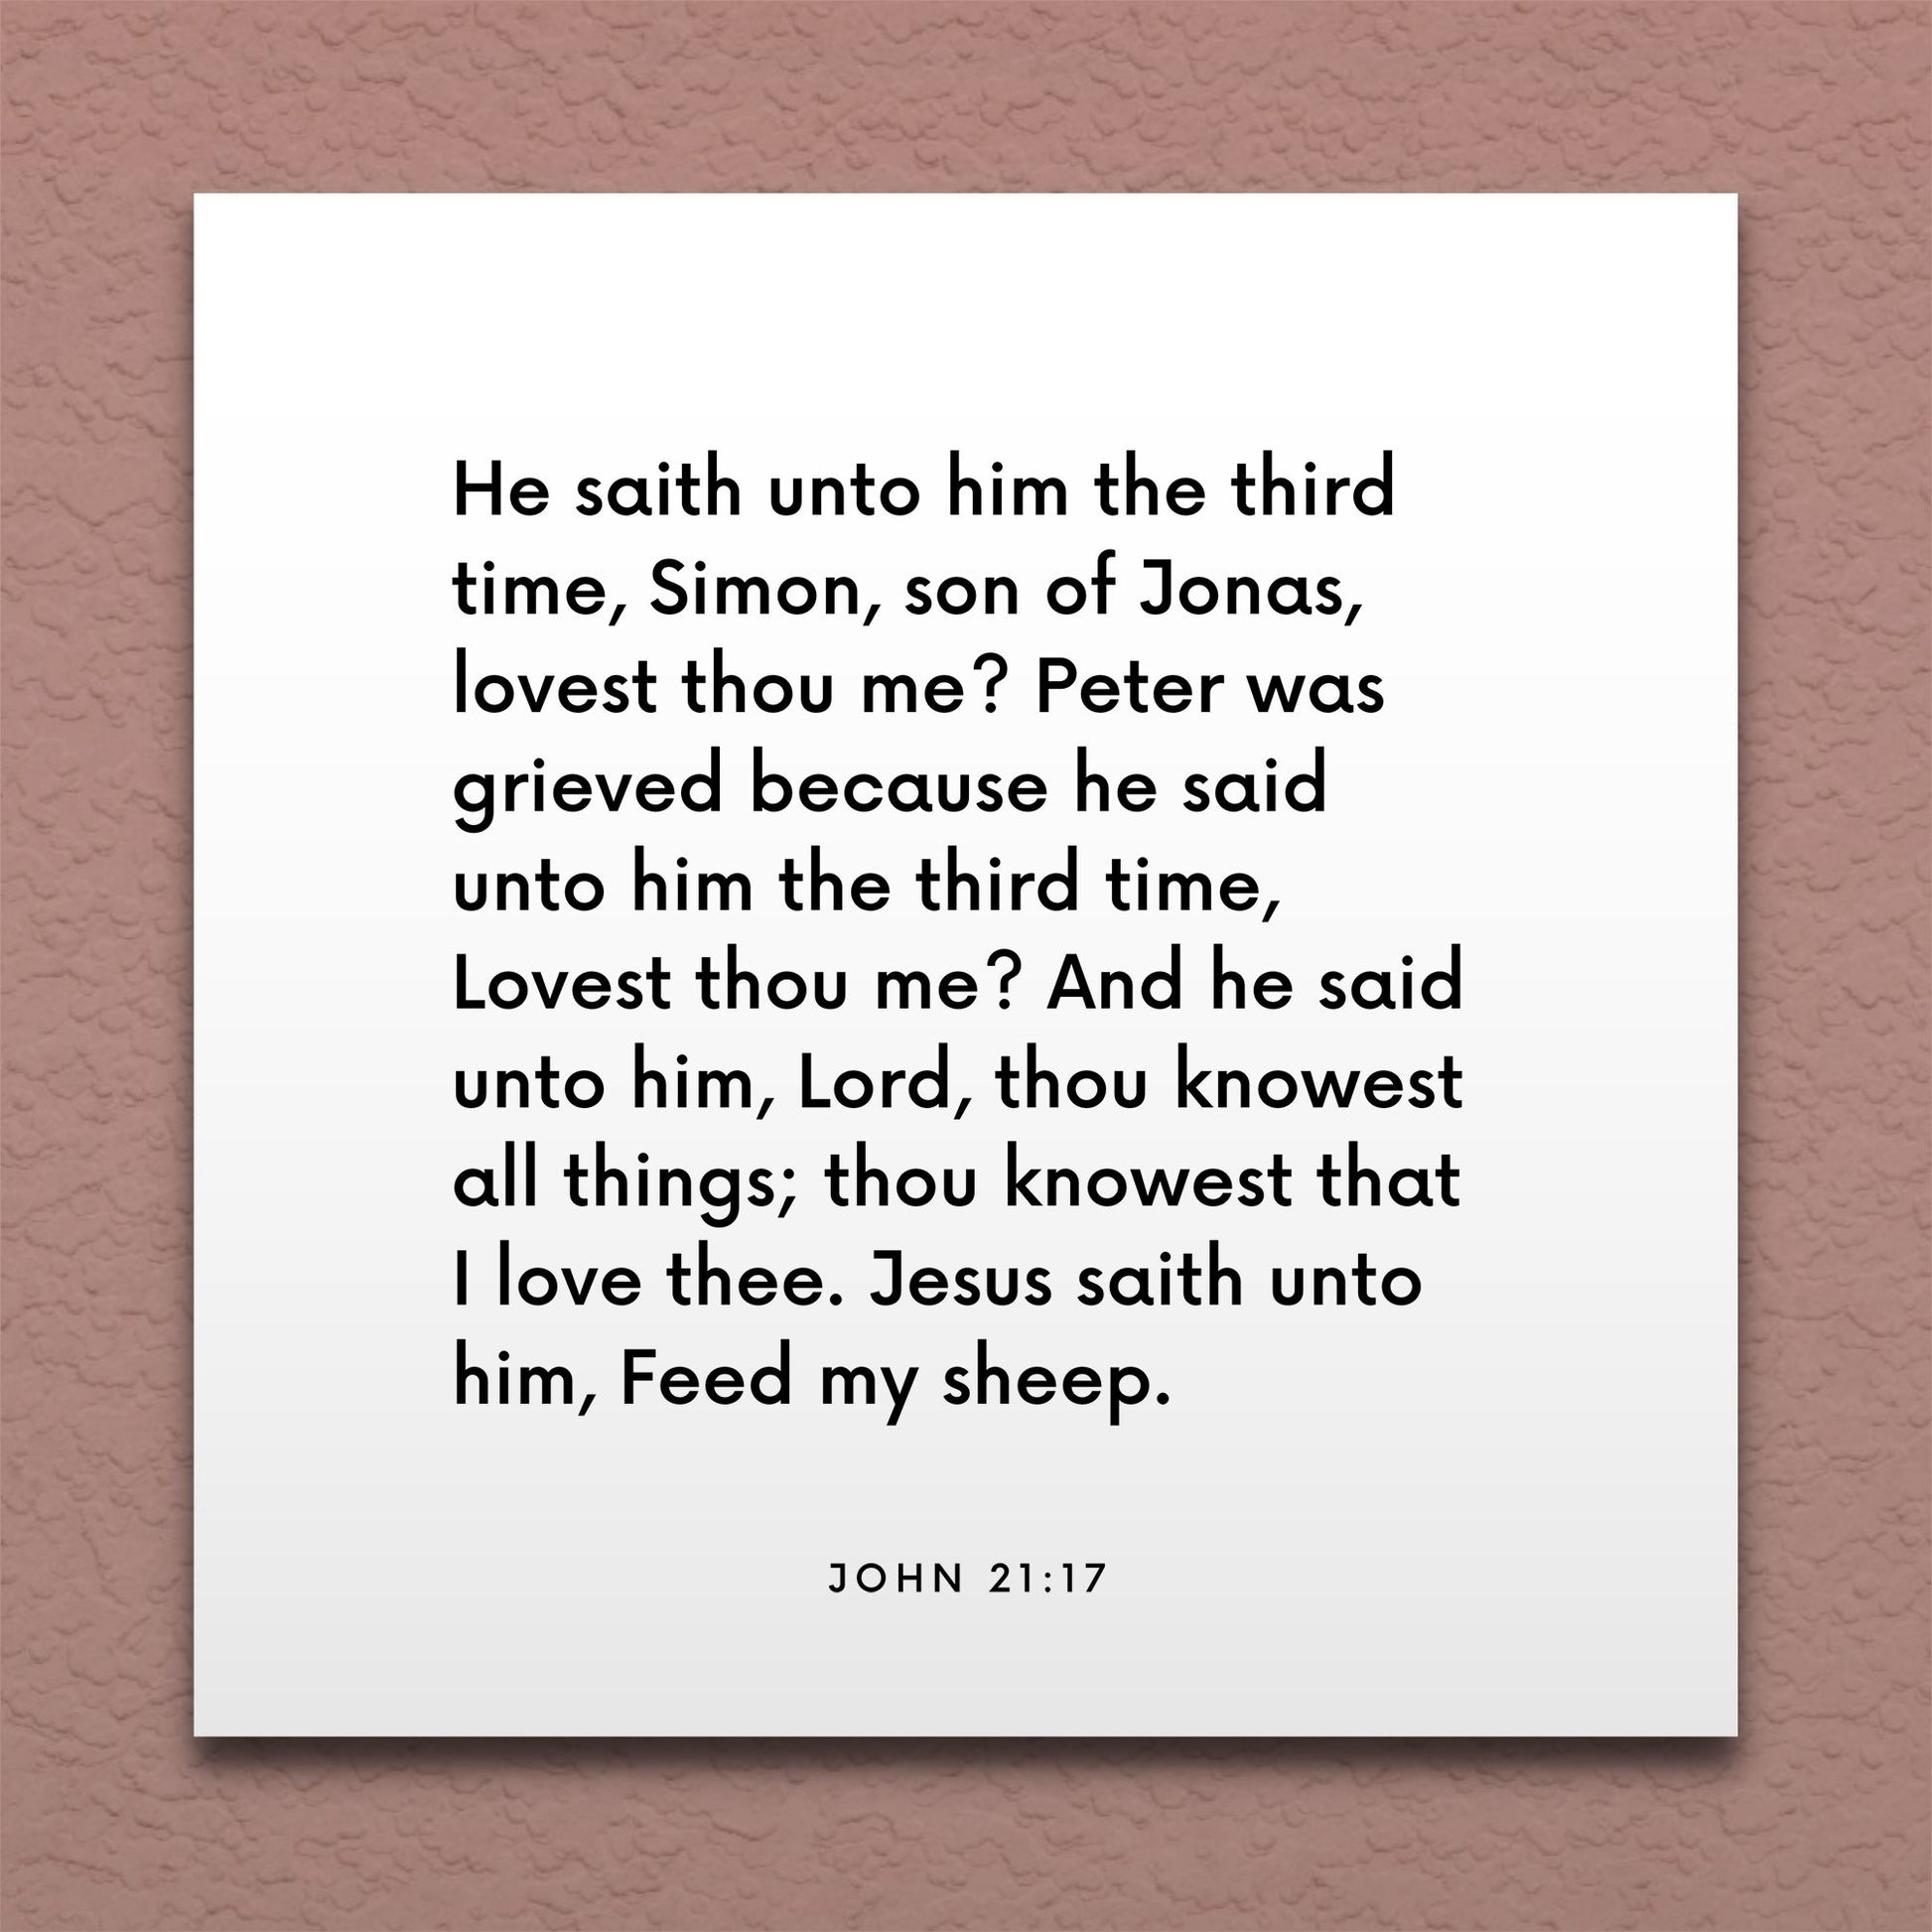 Wall-mounted scripture tile for John 21:17 - "Simon, lovest thou me? Feed my sheep."